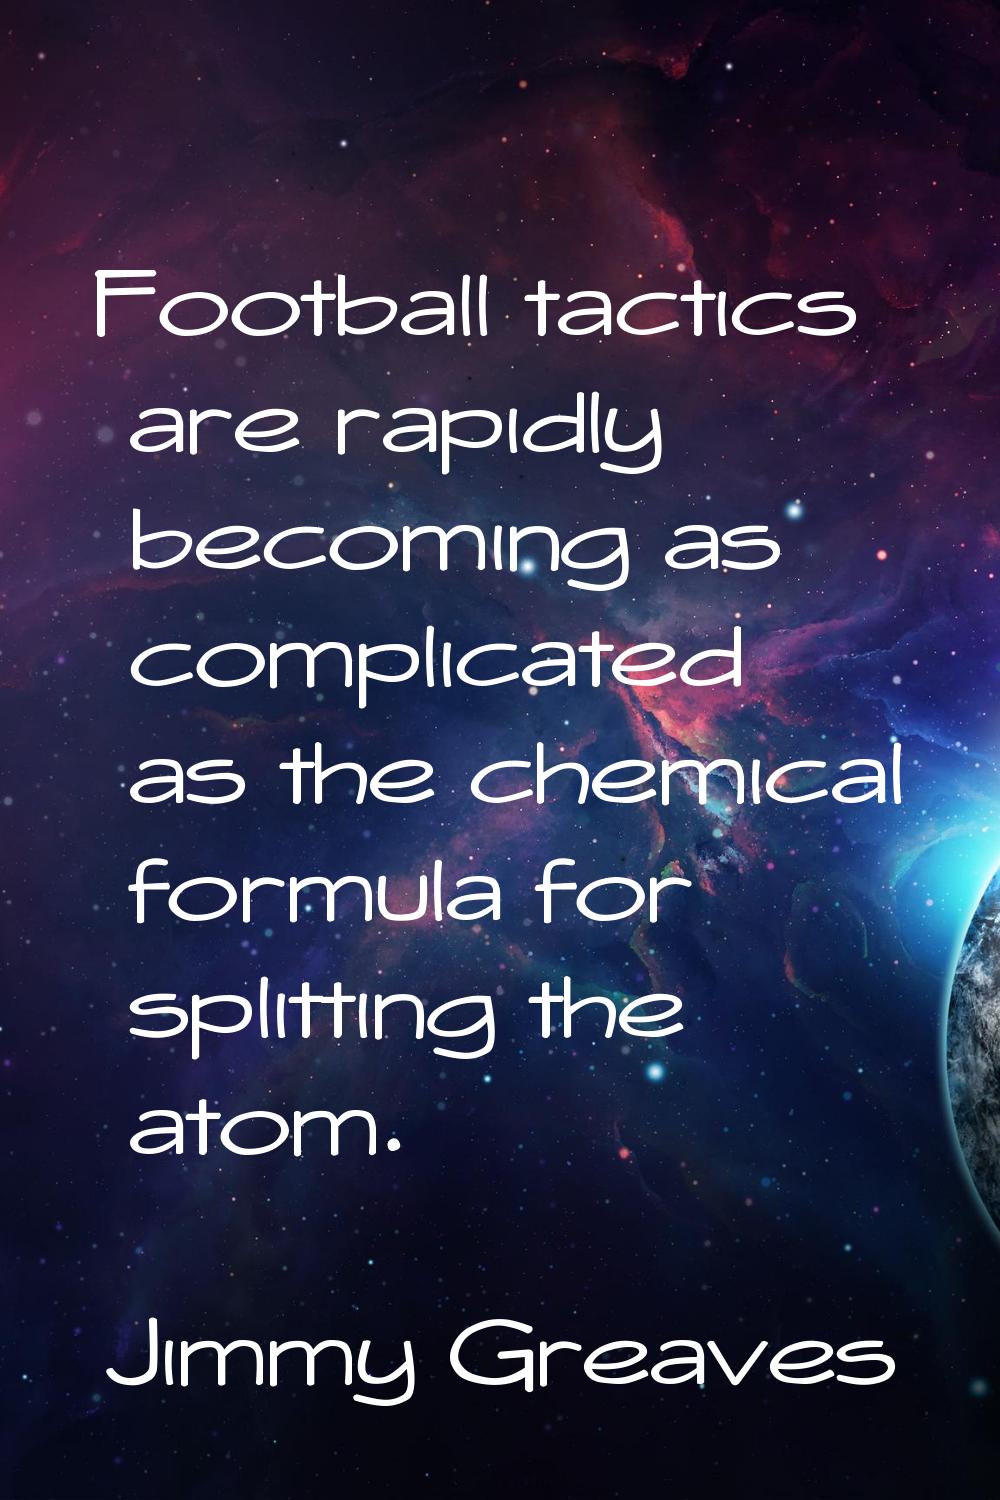 Football tactics are rapidly becoming as complicated as the chemical formula for splitting the atom